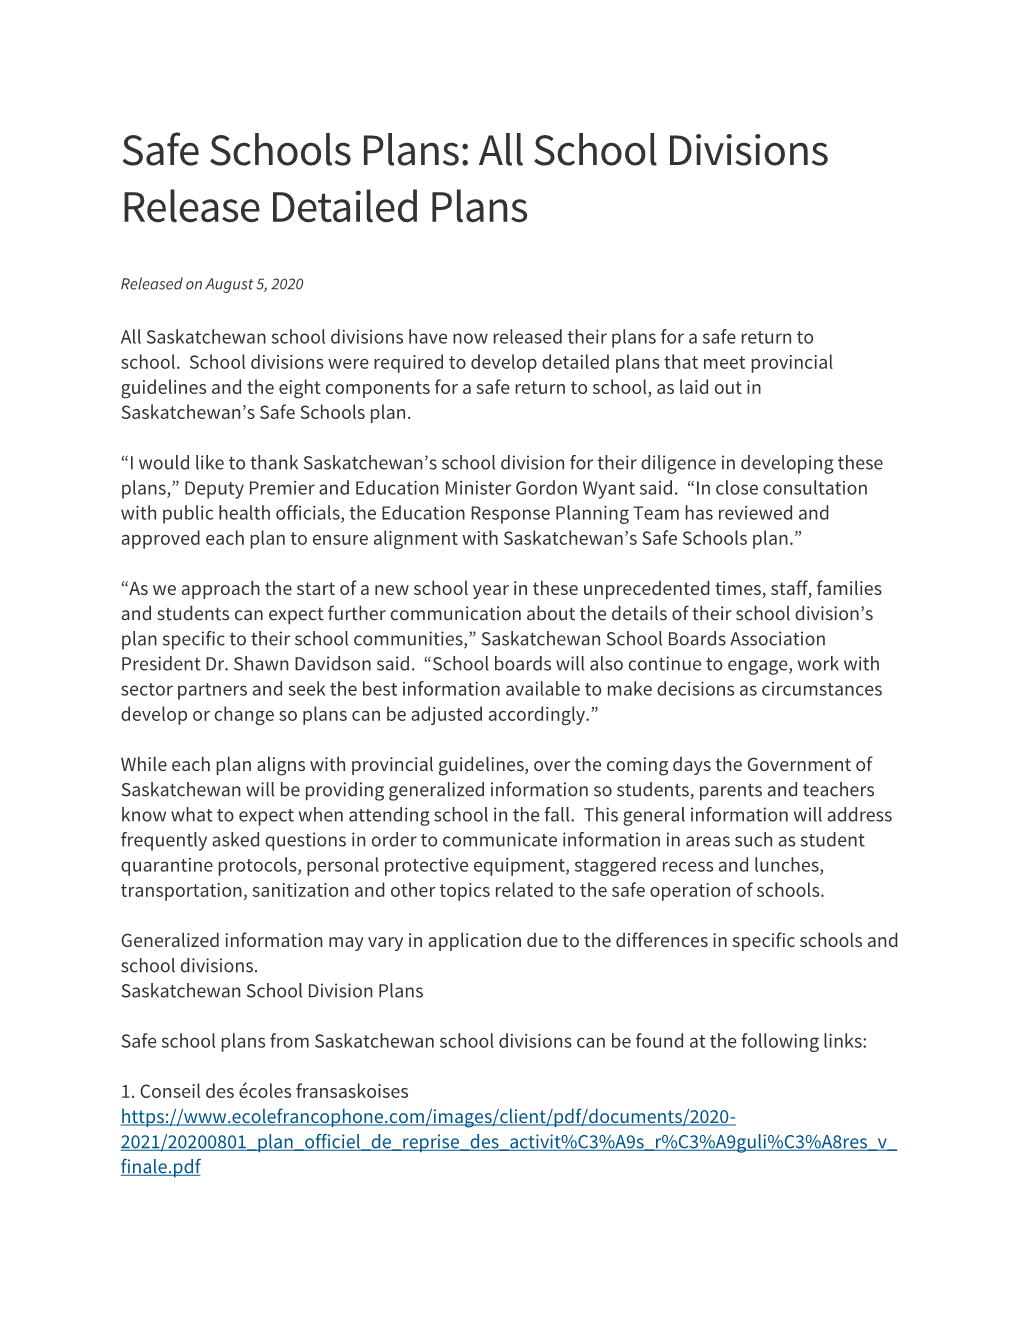 Safe Schools Plans: All School Divisions Release Detailed Plans